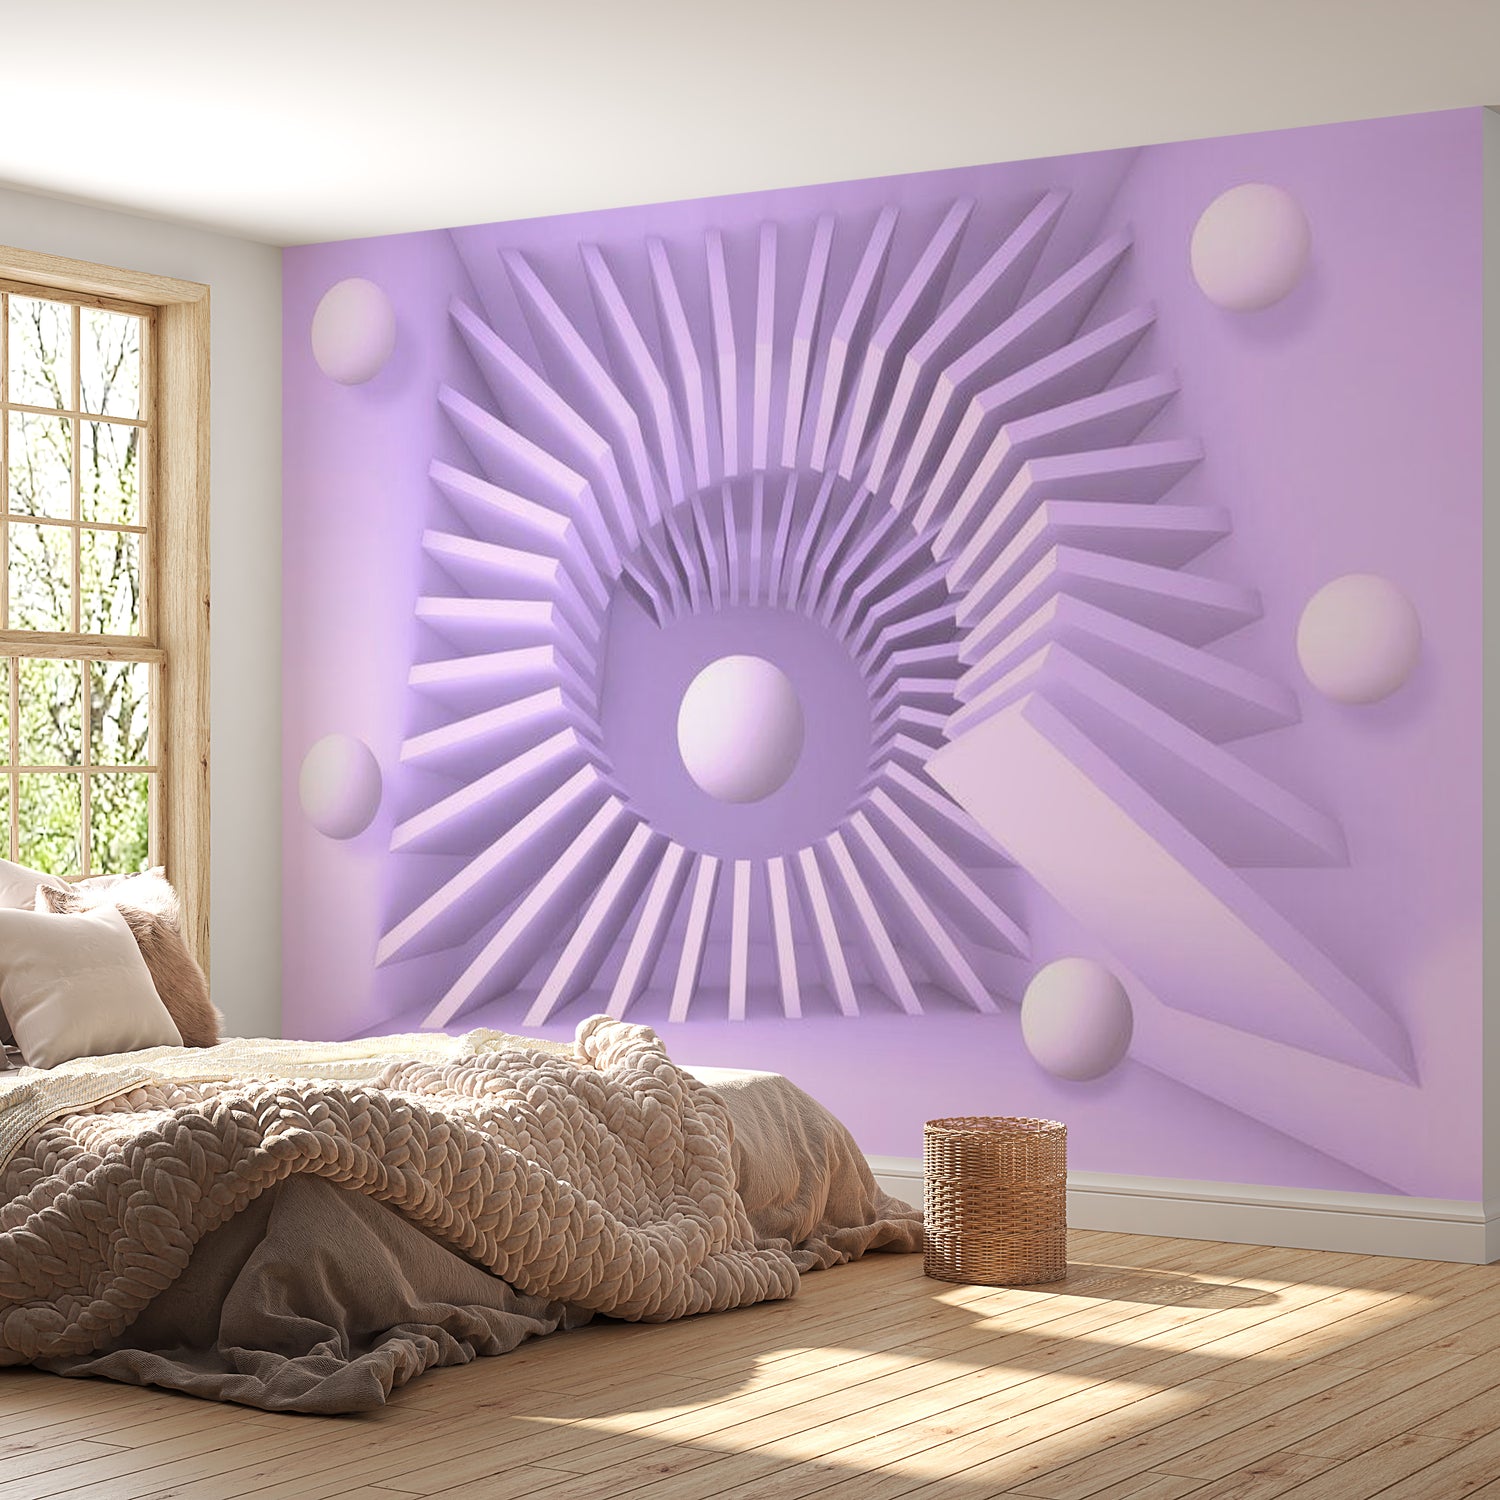 Peel & Stick 3D Illusion Wall Mural - Lavender Maze - Removable Wall Decals